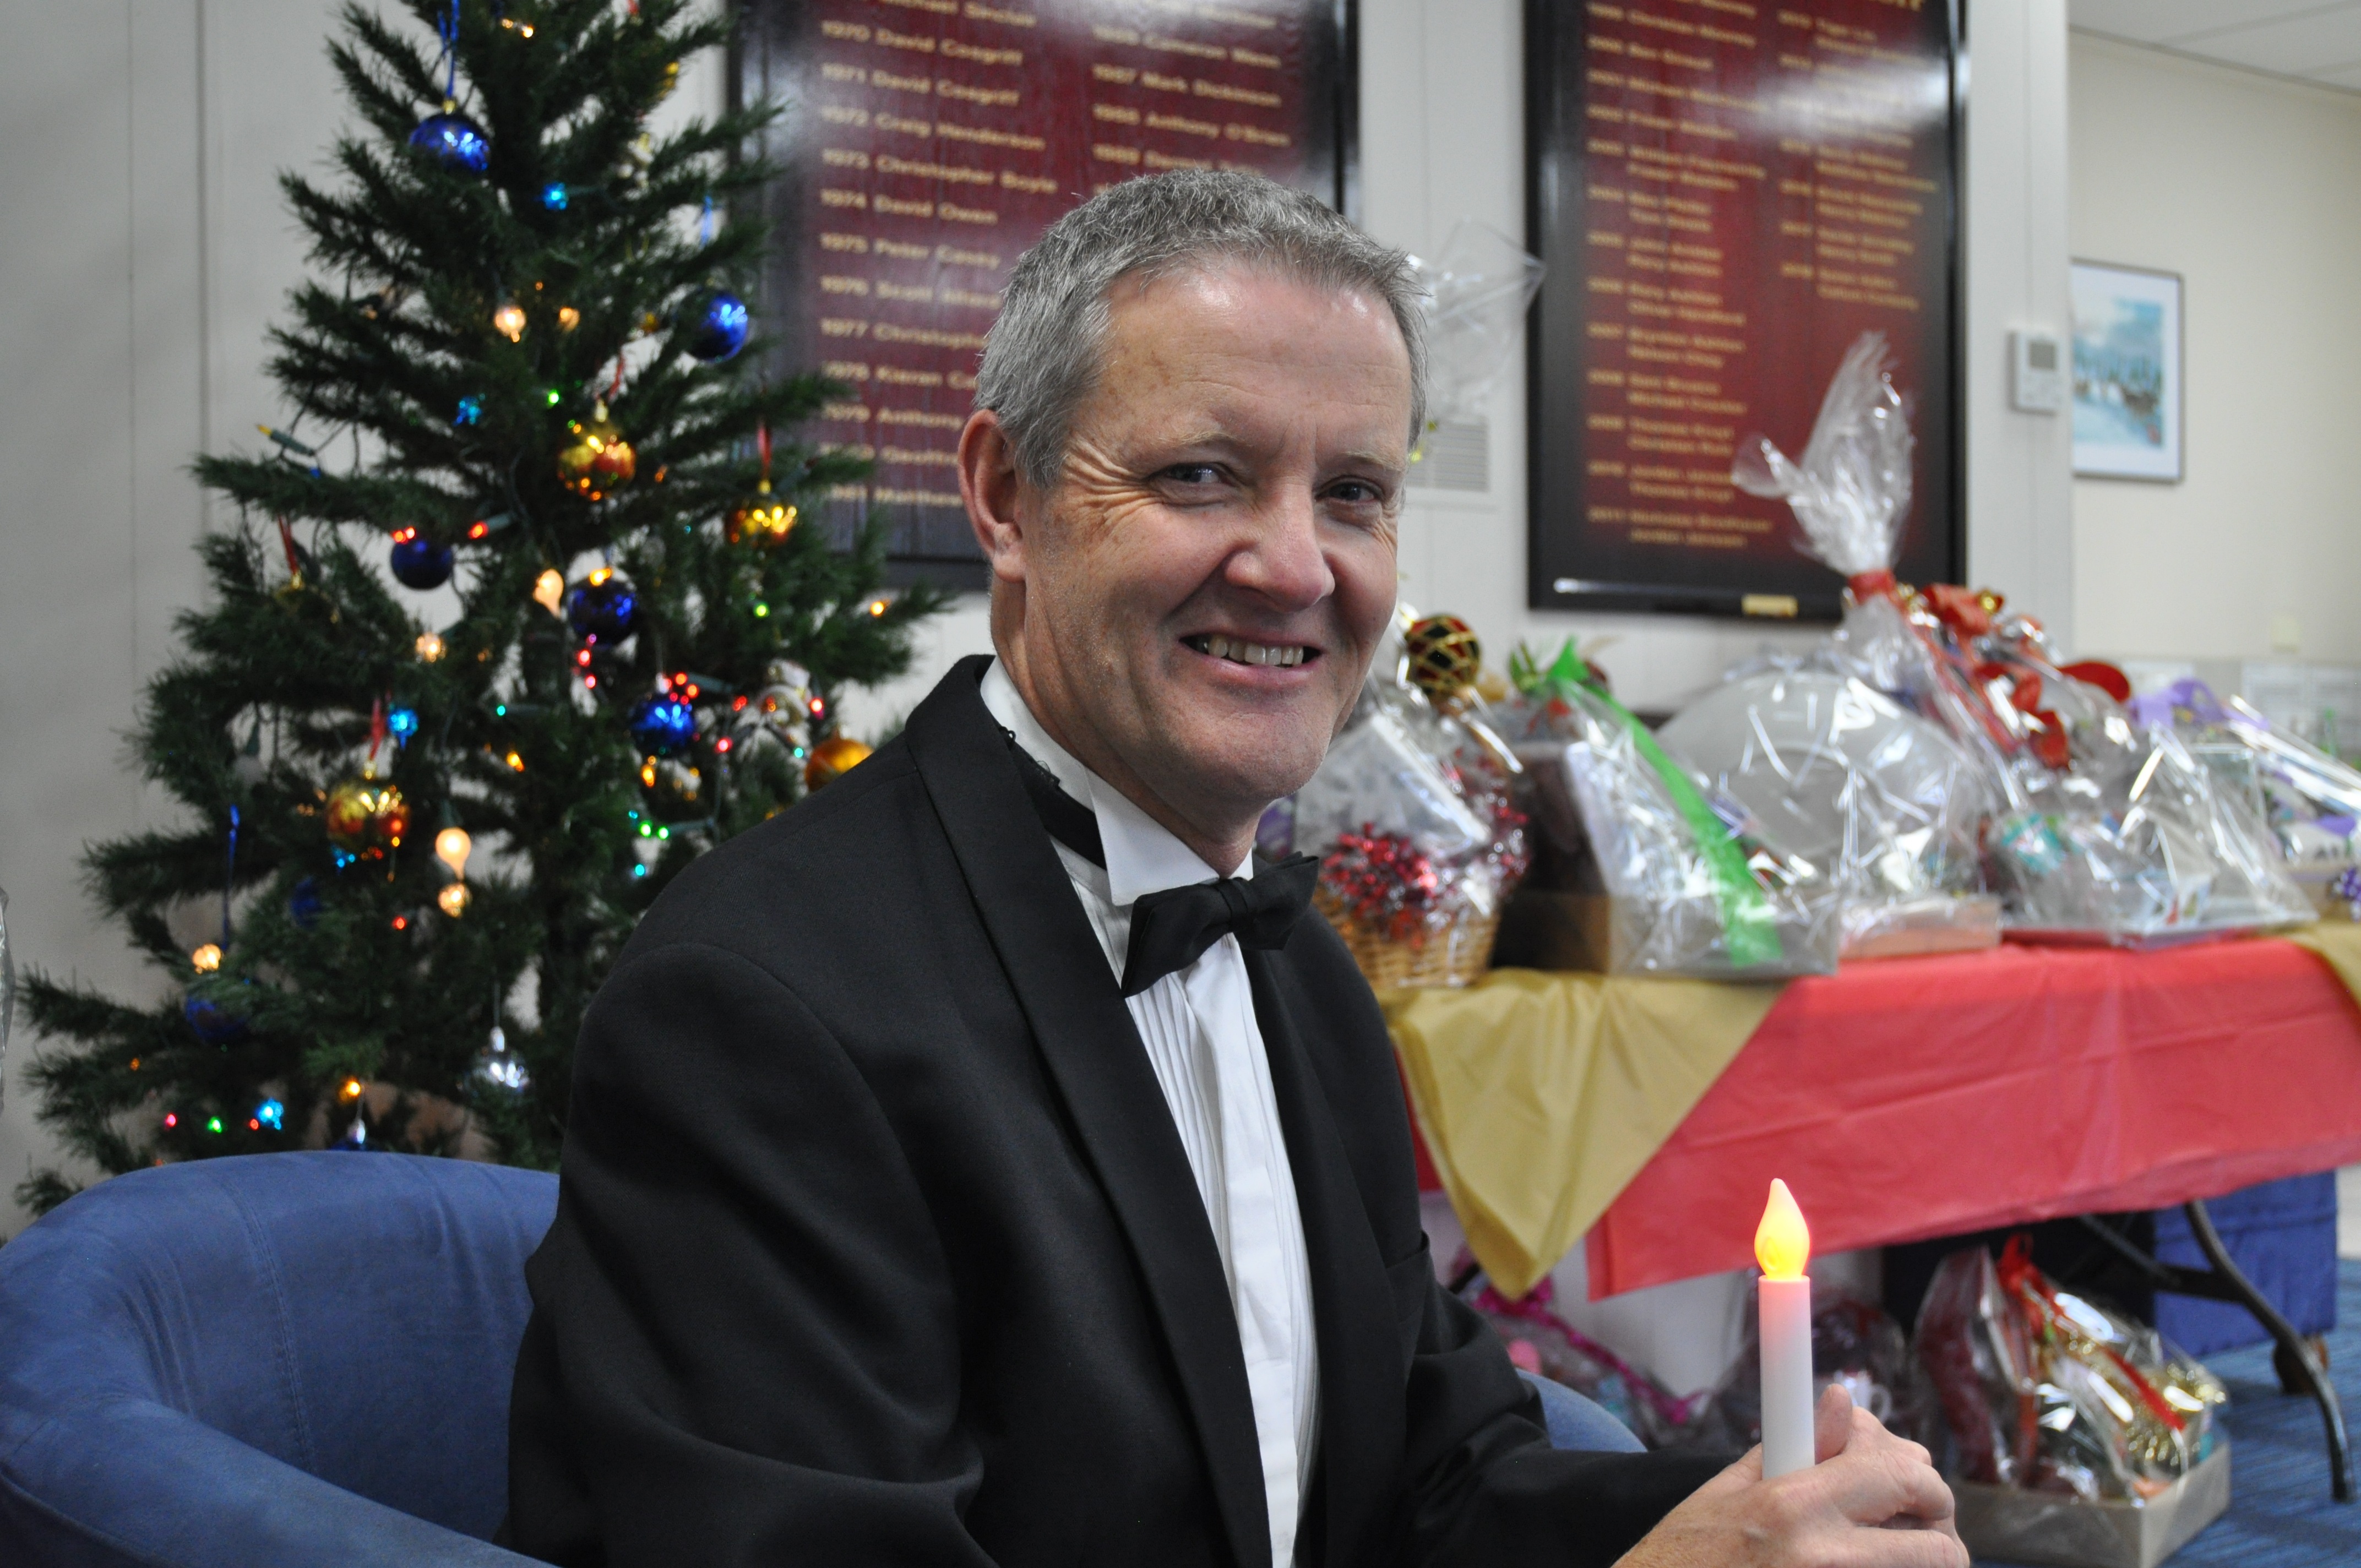 National Boys Choir co-artistic director, wearig a black dinner suit, holds a battery-powered candle with a Christmas tree and cellophane-wrapped gift baskets in the background.